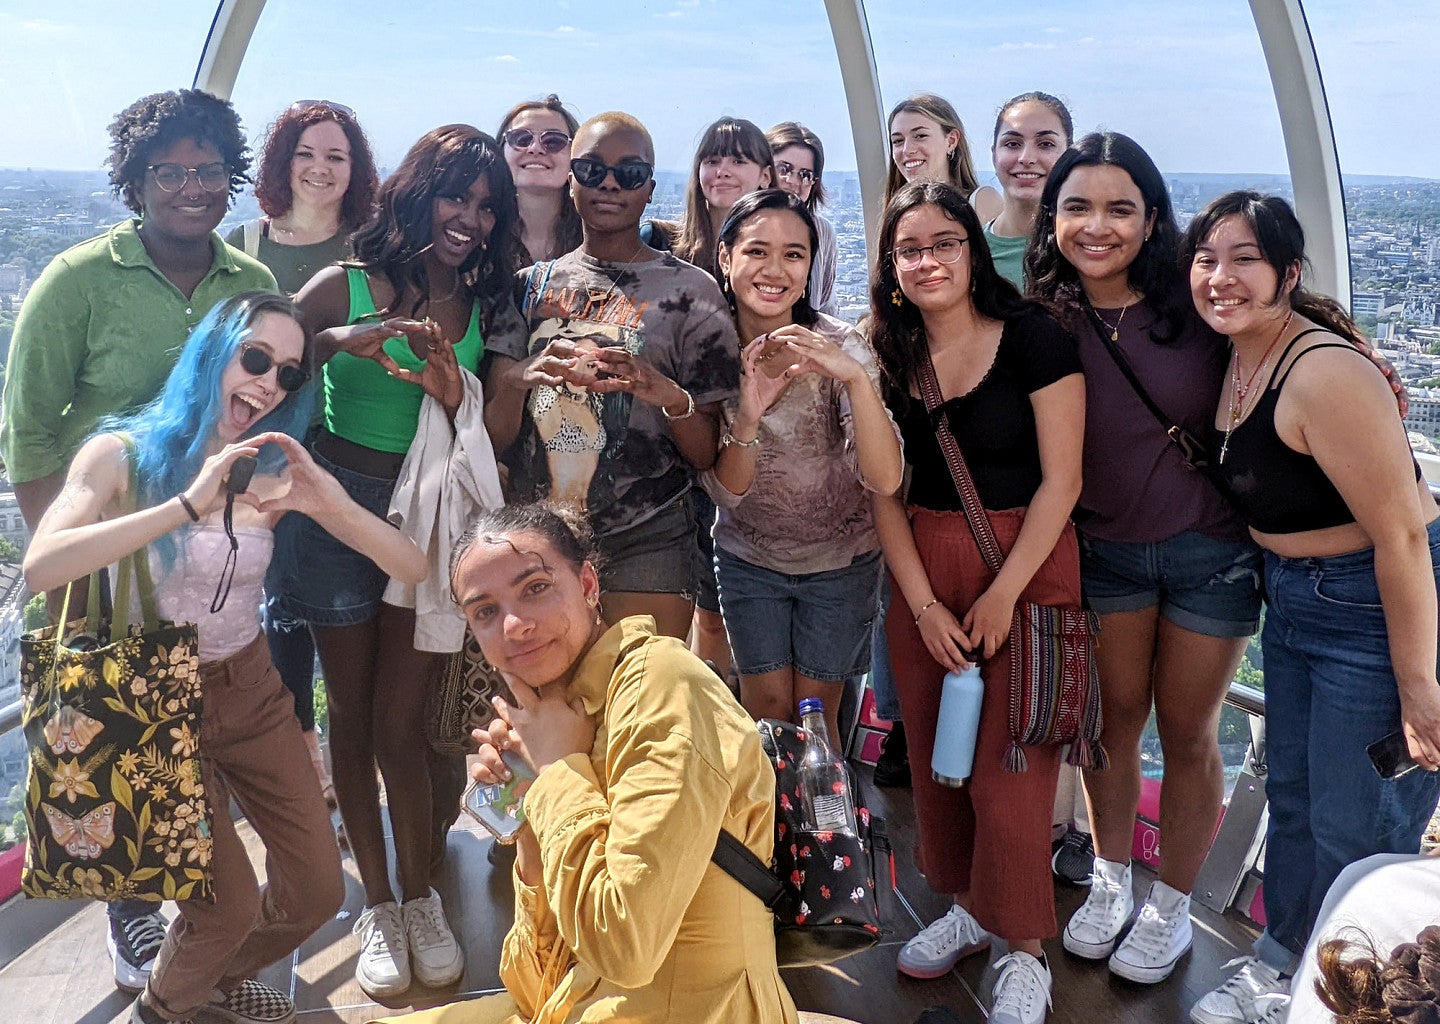 UO students ride the London Eye